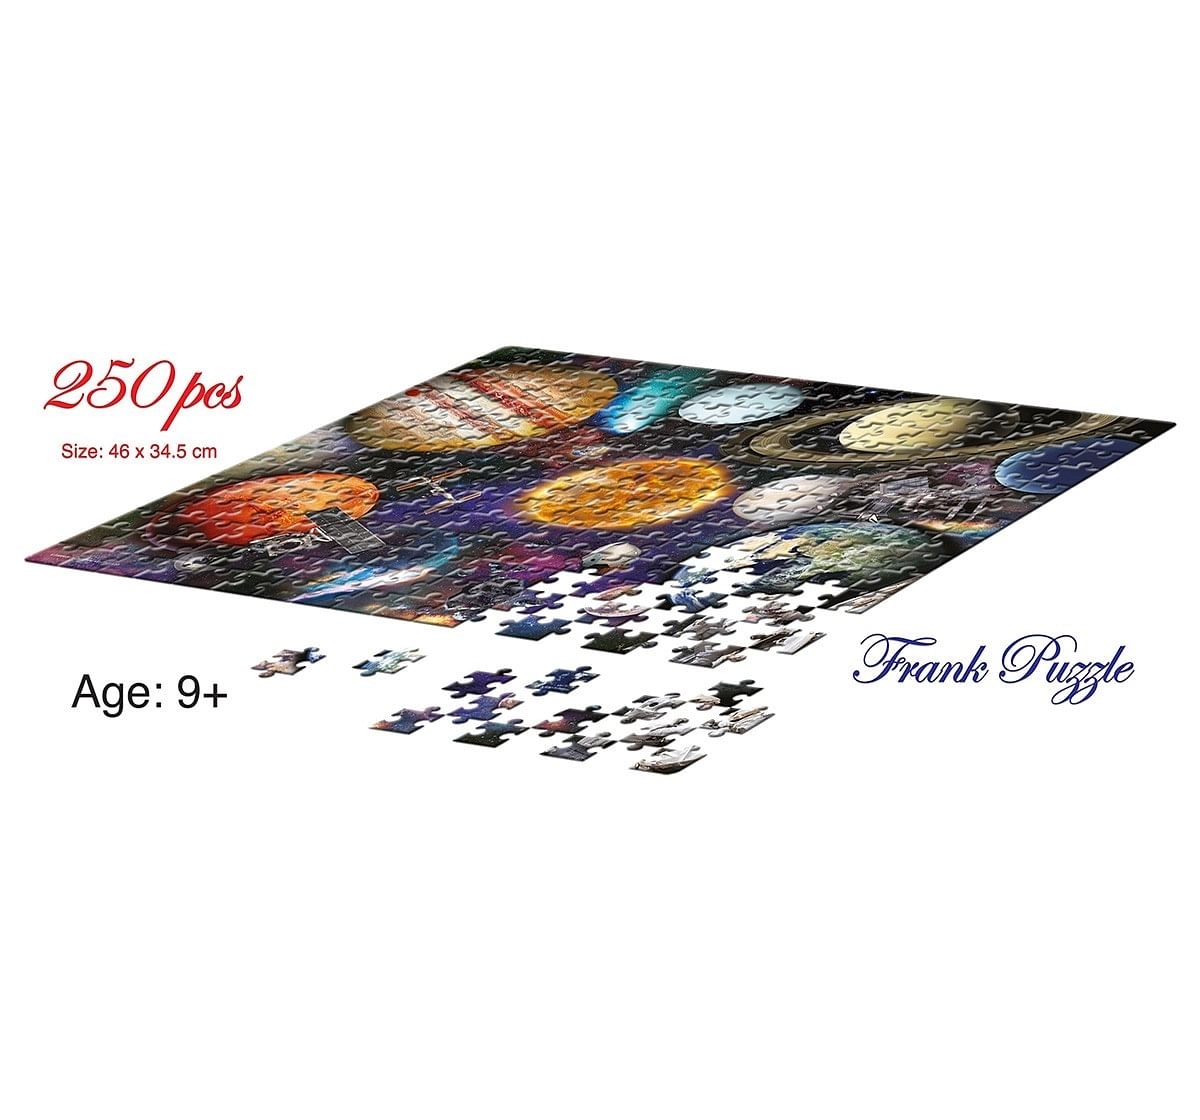 Frank In Space Puzzle 250 Pcs, 9Y+